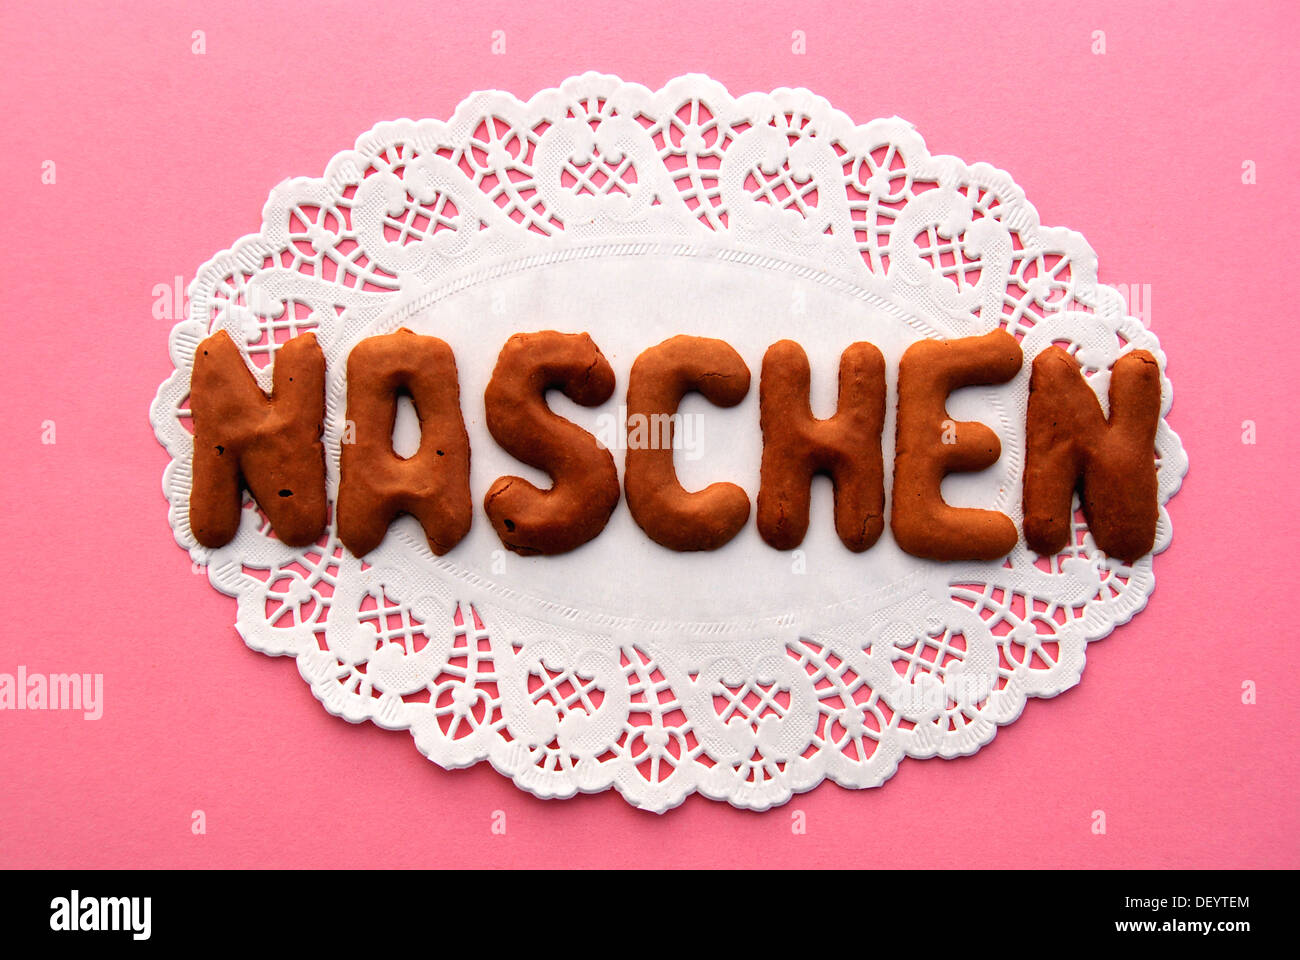 Lettering 'Naschen', German for 'eating sweets', lettering, alphabet biscuits on a cake lace coaster Stock Photo